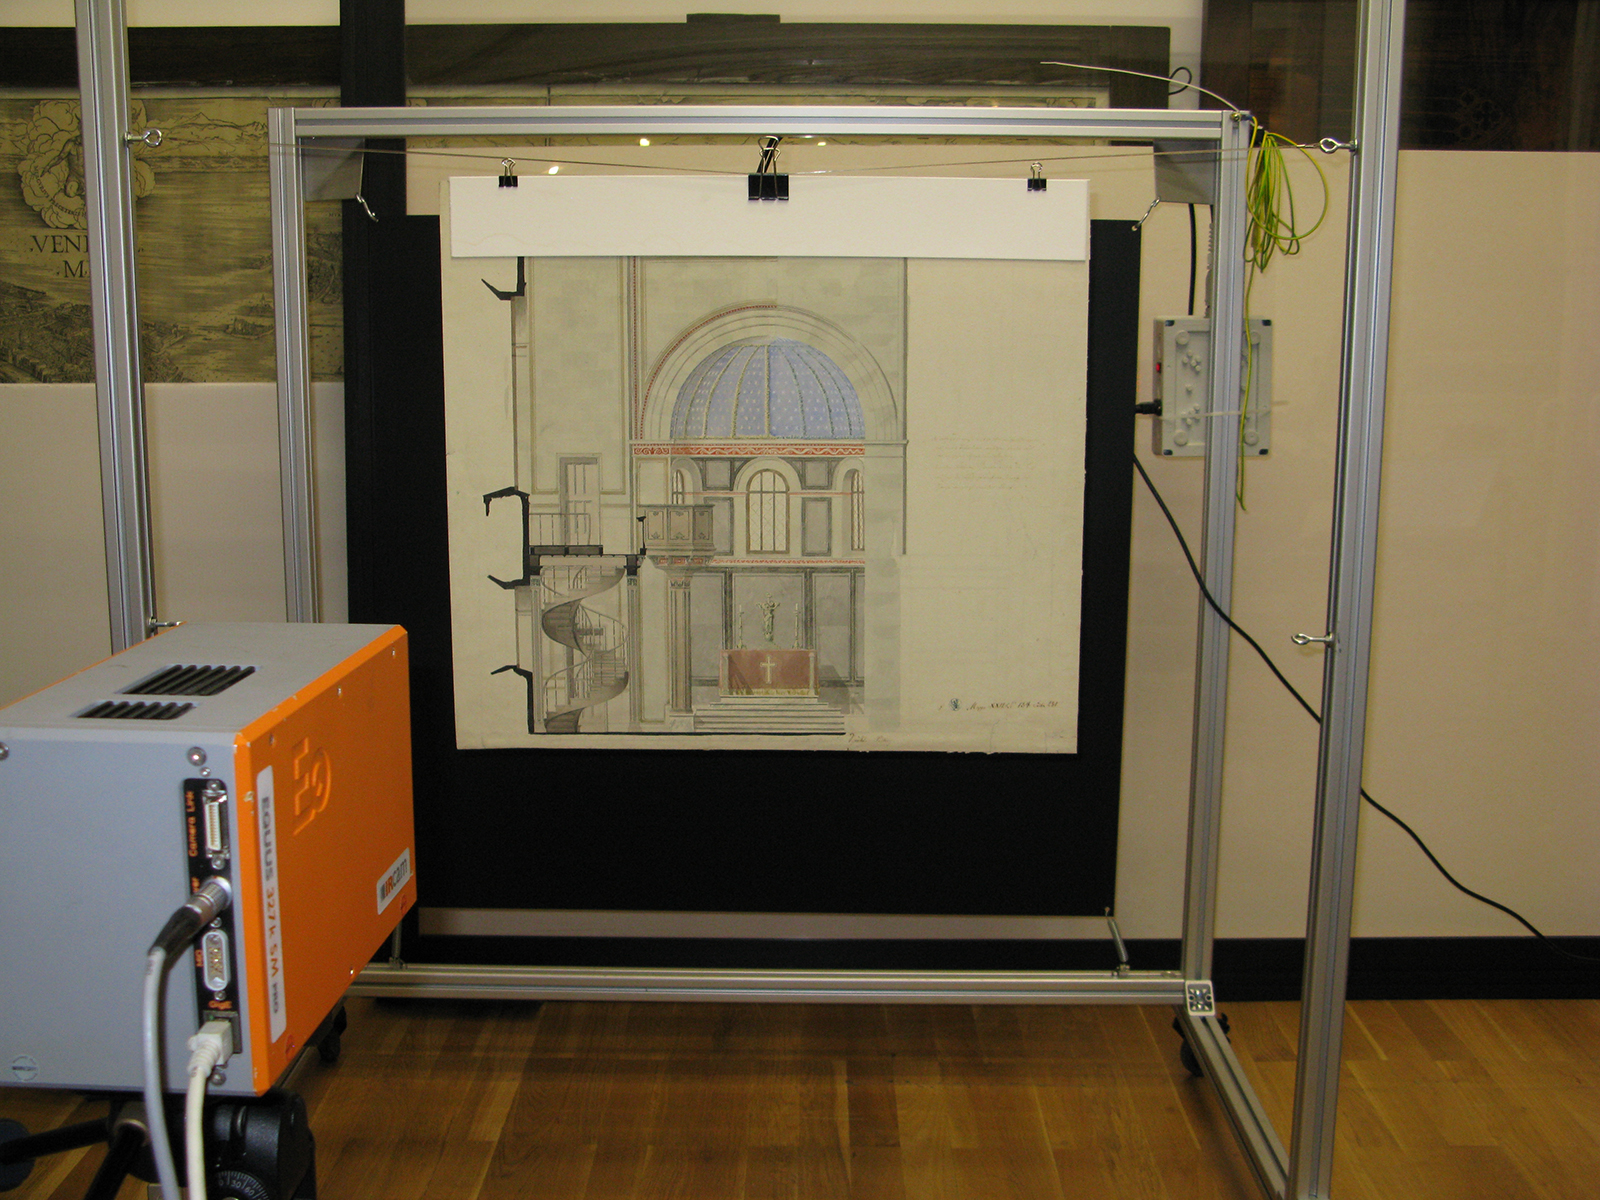 Large-format drawings by architect Karl Friedrich Schinkel are scanned using the infrared camera.